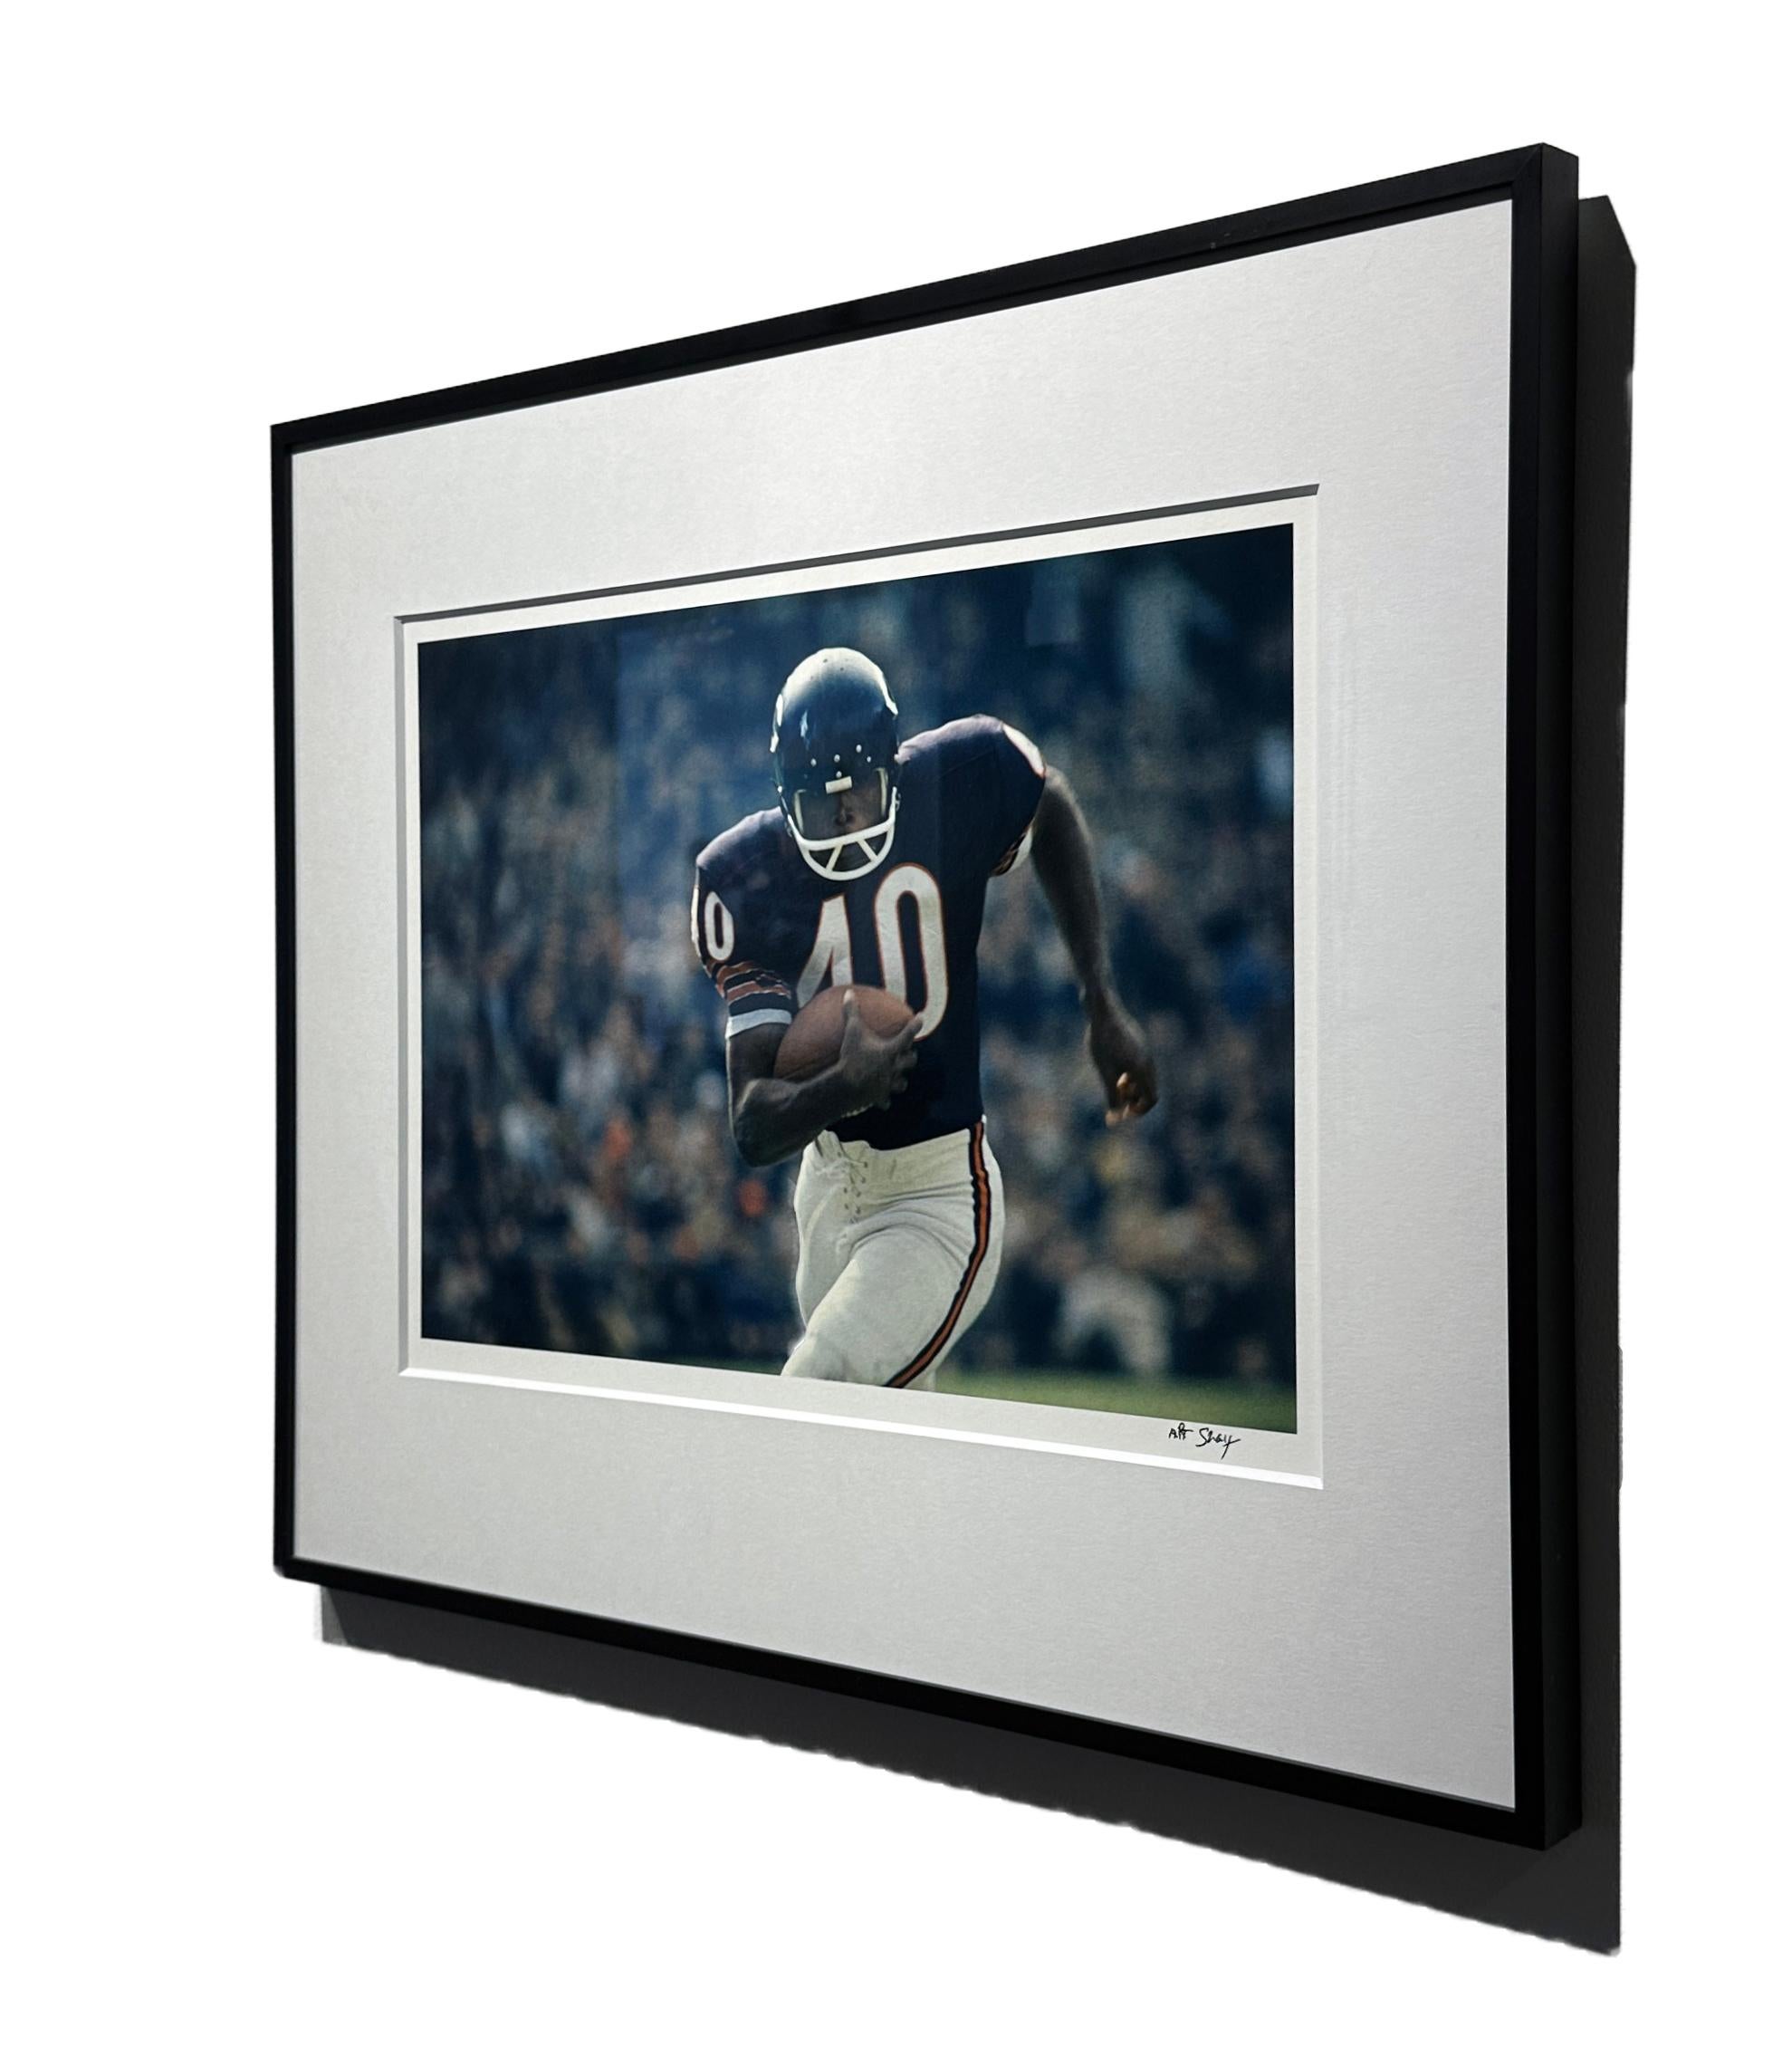 Art Shay
Gale Sayers #40, 1966
archival pigment print
20.25 x 24.25 framed
3/3
ASY028

“Art Shay’s photography shakes you up, sets you down gently, pats you on the head and then kicks you in the ass.”
Roger Ebert


“[Shay’s work] ranks with some of